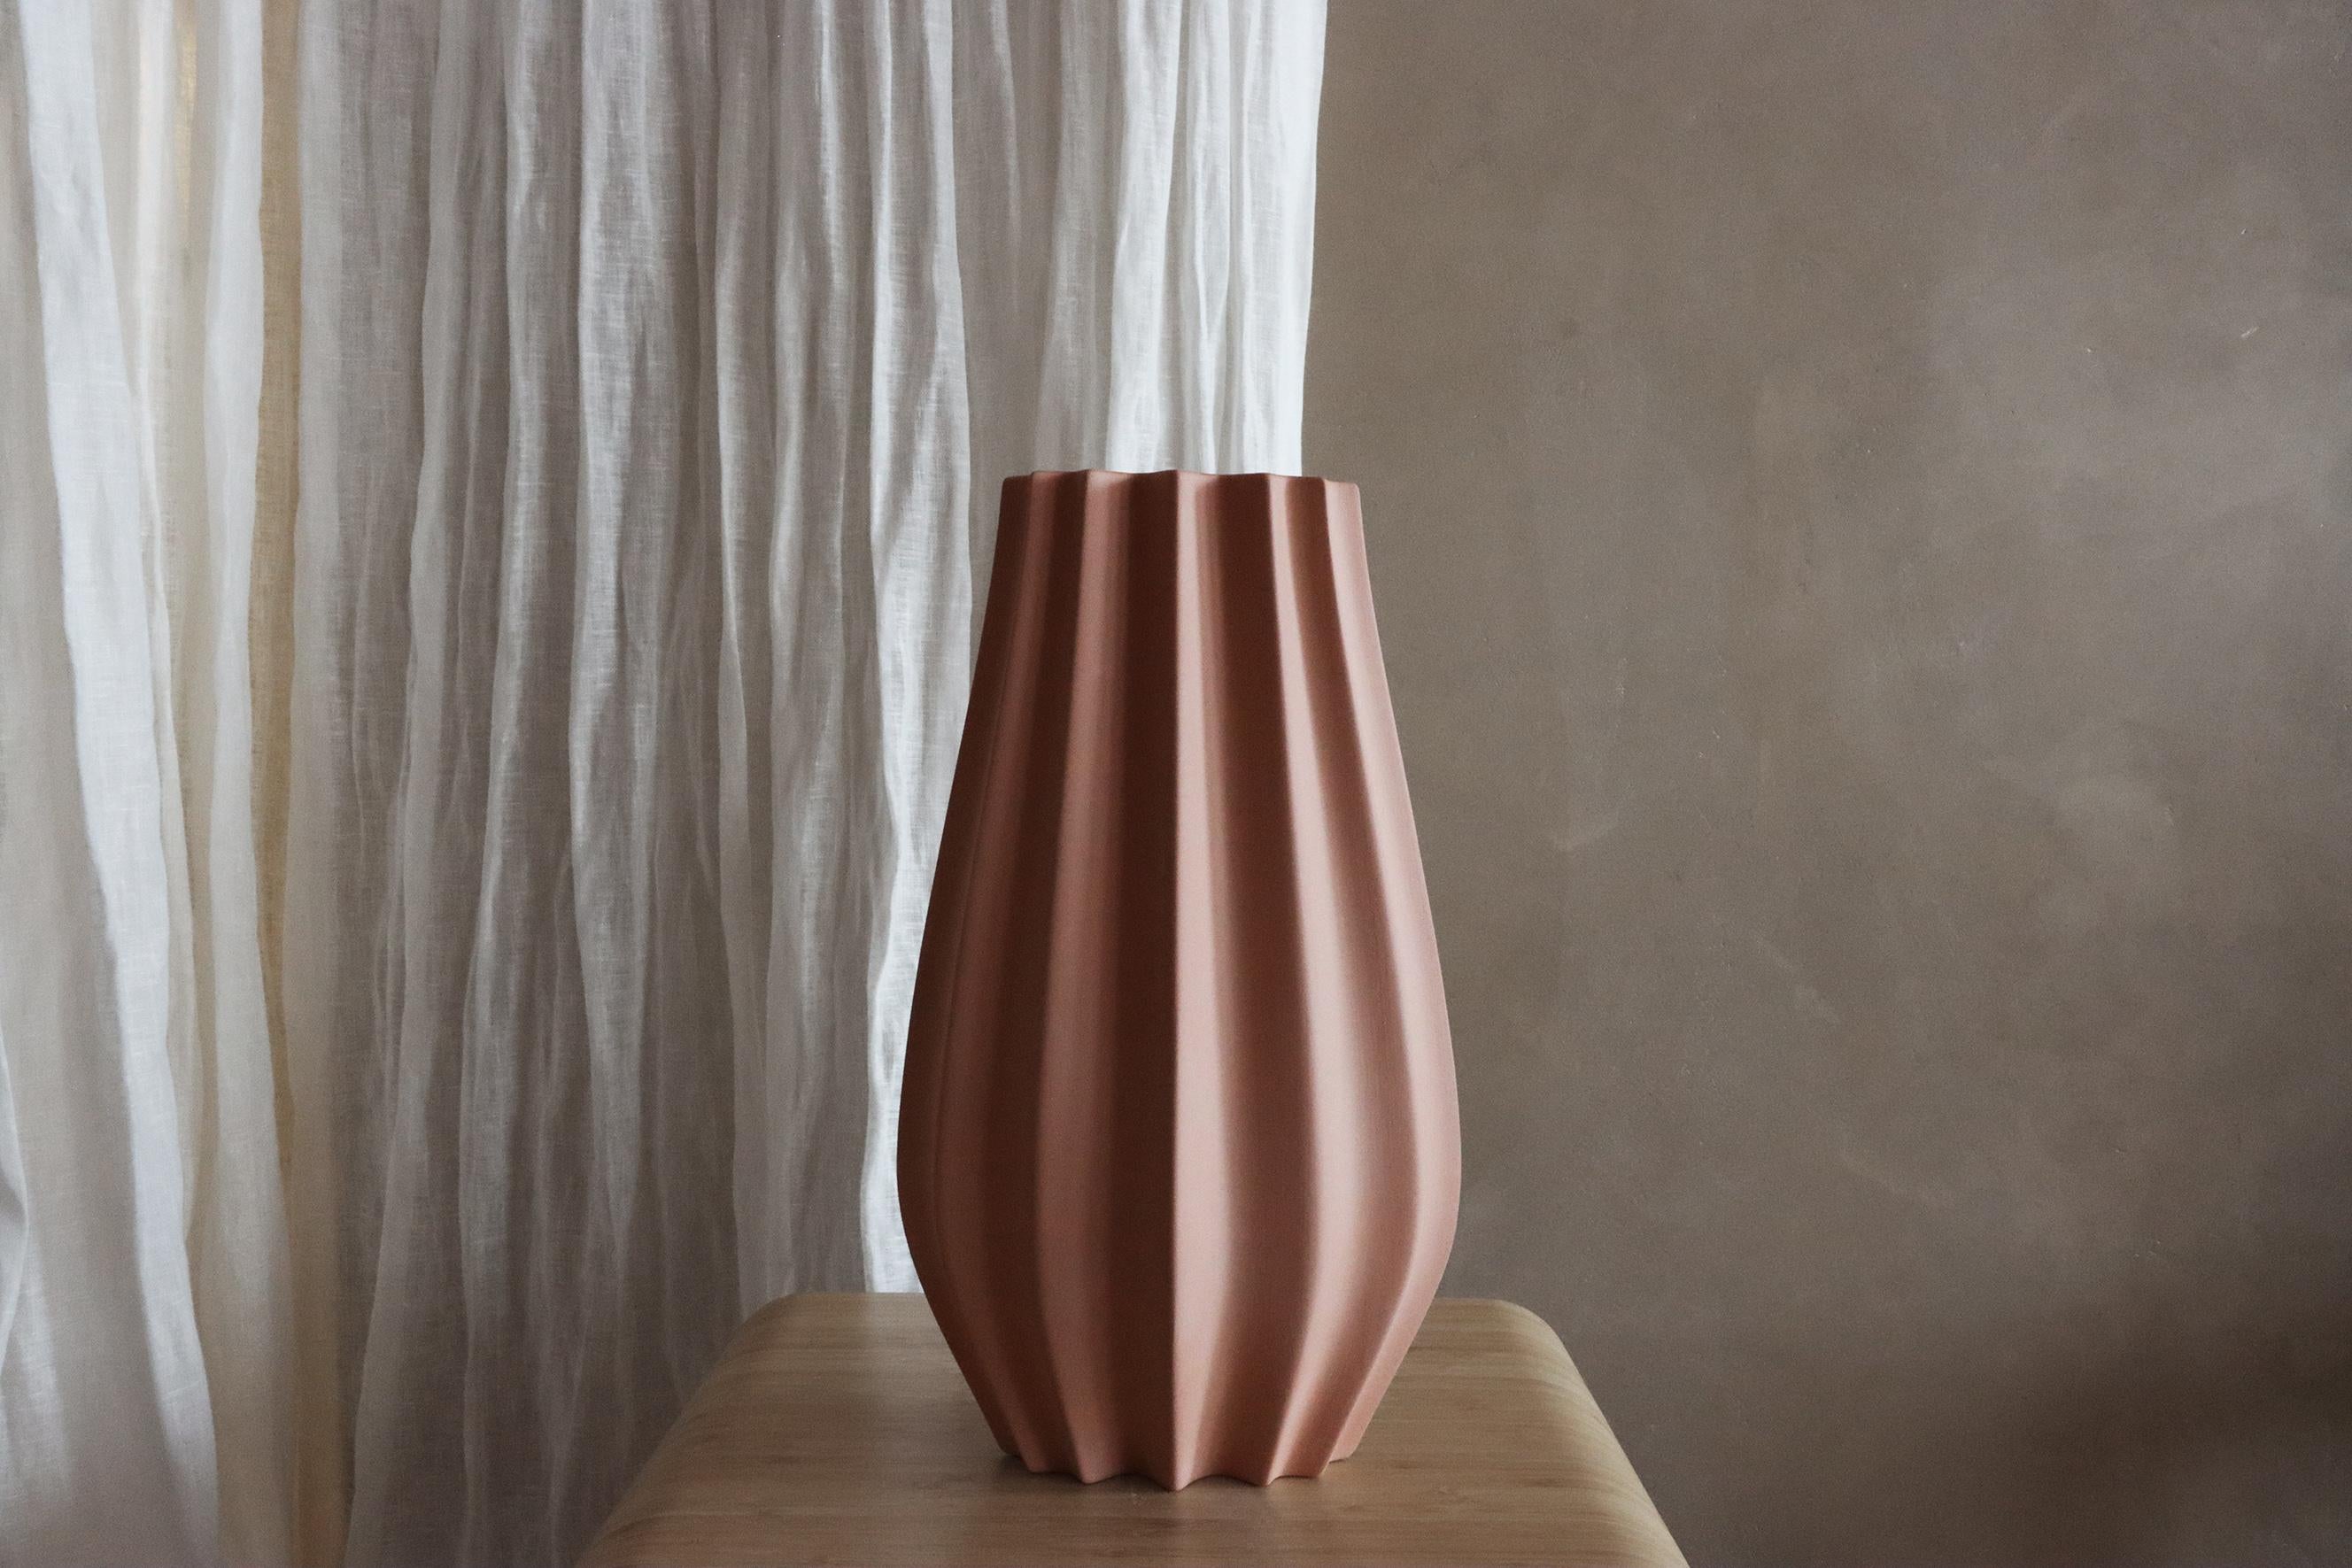 We are excited to introduce the latest addition to the Object Van Brandenburg family - the Fluted Vase. 
The Fluted Vase is a testament to both elegance and craftsmanship. Its unique design, characterized by delicate fluted lines, sets it apart as a